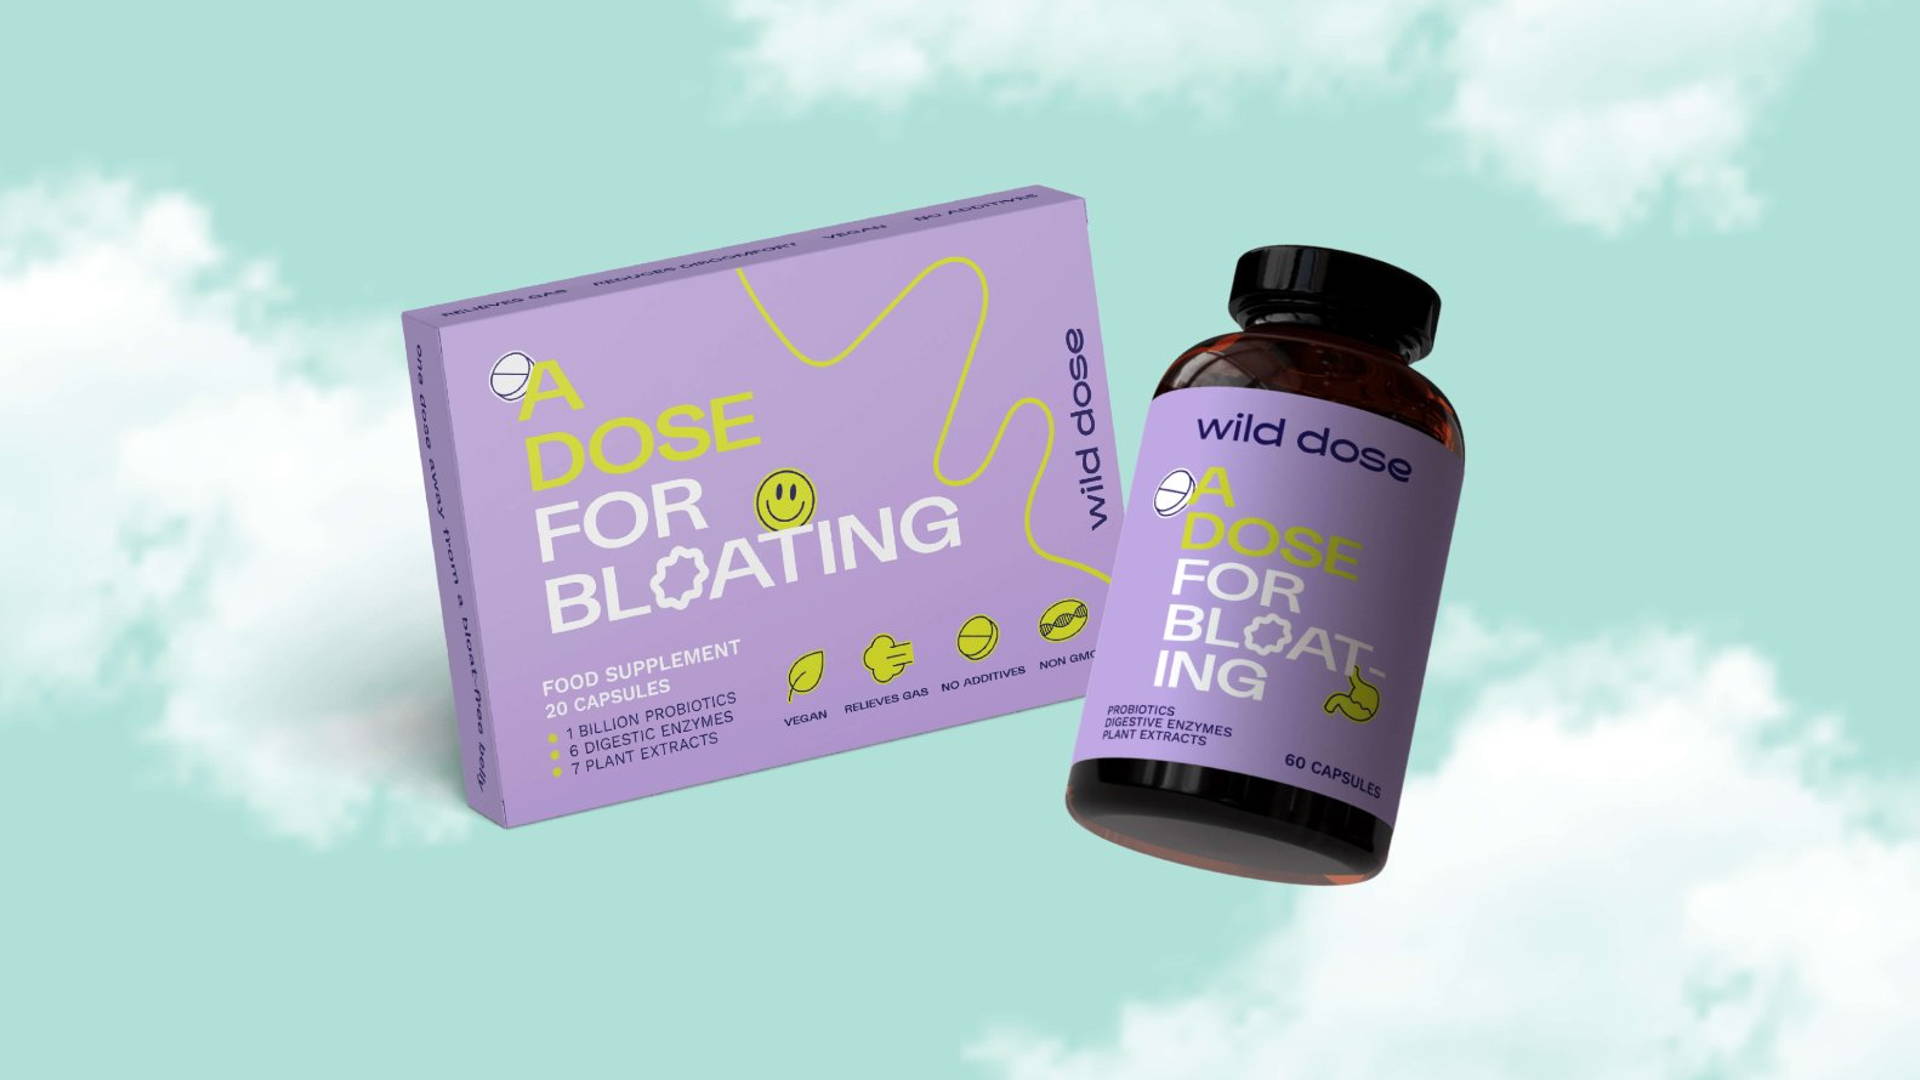 Featured image for Wild Dose Aims To Tame Bloating With Attractive Branding